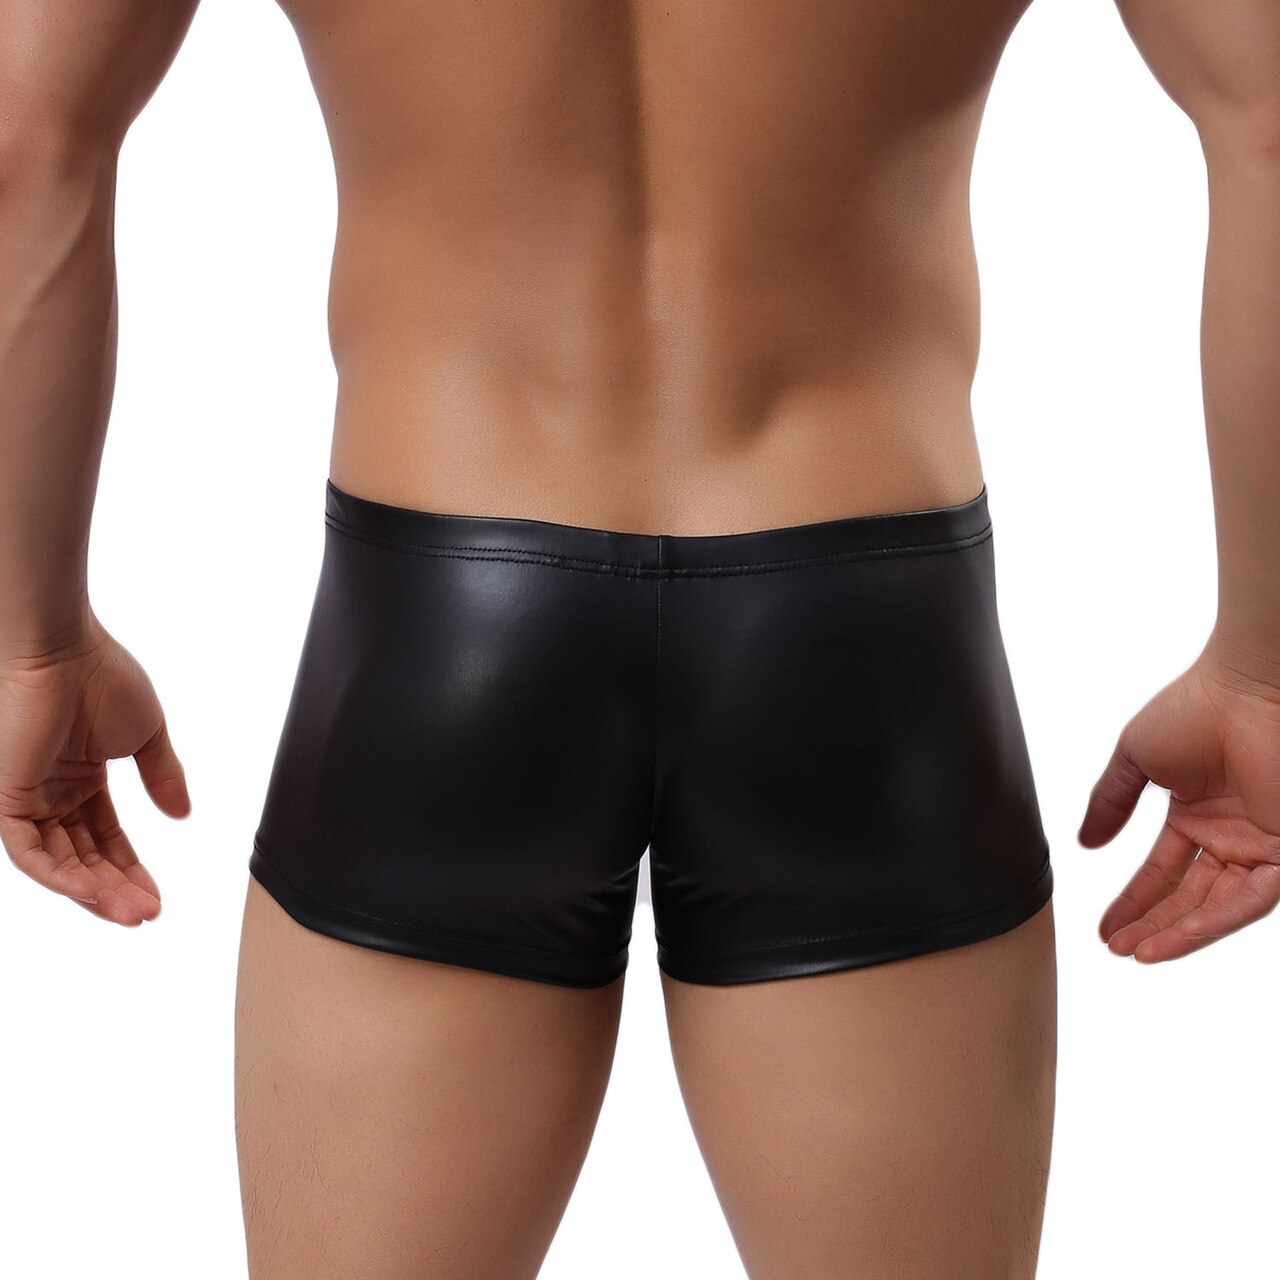 Mens Wetlook Boxer Shorts with Pouch Front Black